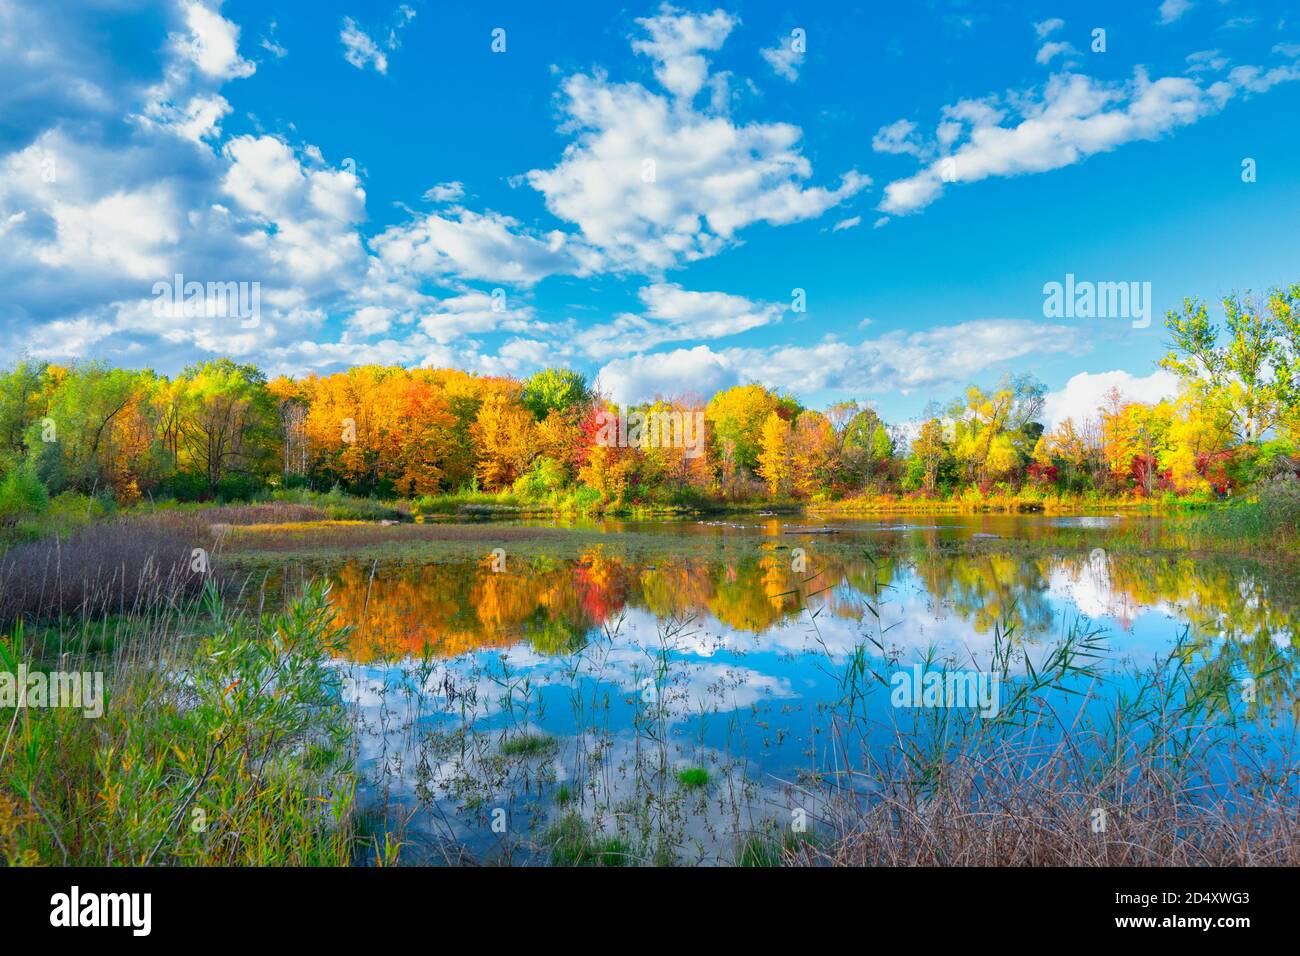 Autumn landscape and reflections in Environmental Reserve in University of Waterloo, Kitchener, Ontario, Canada Stock Photo